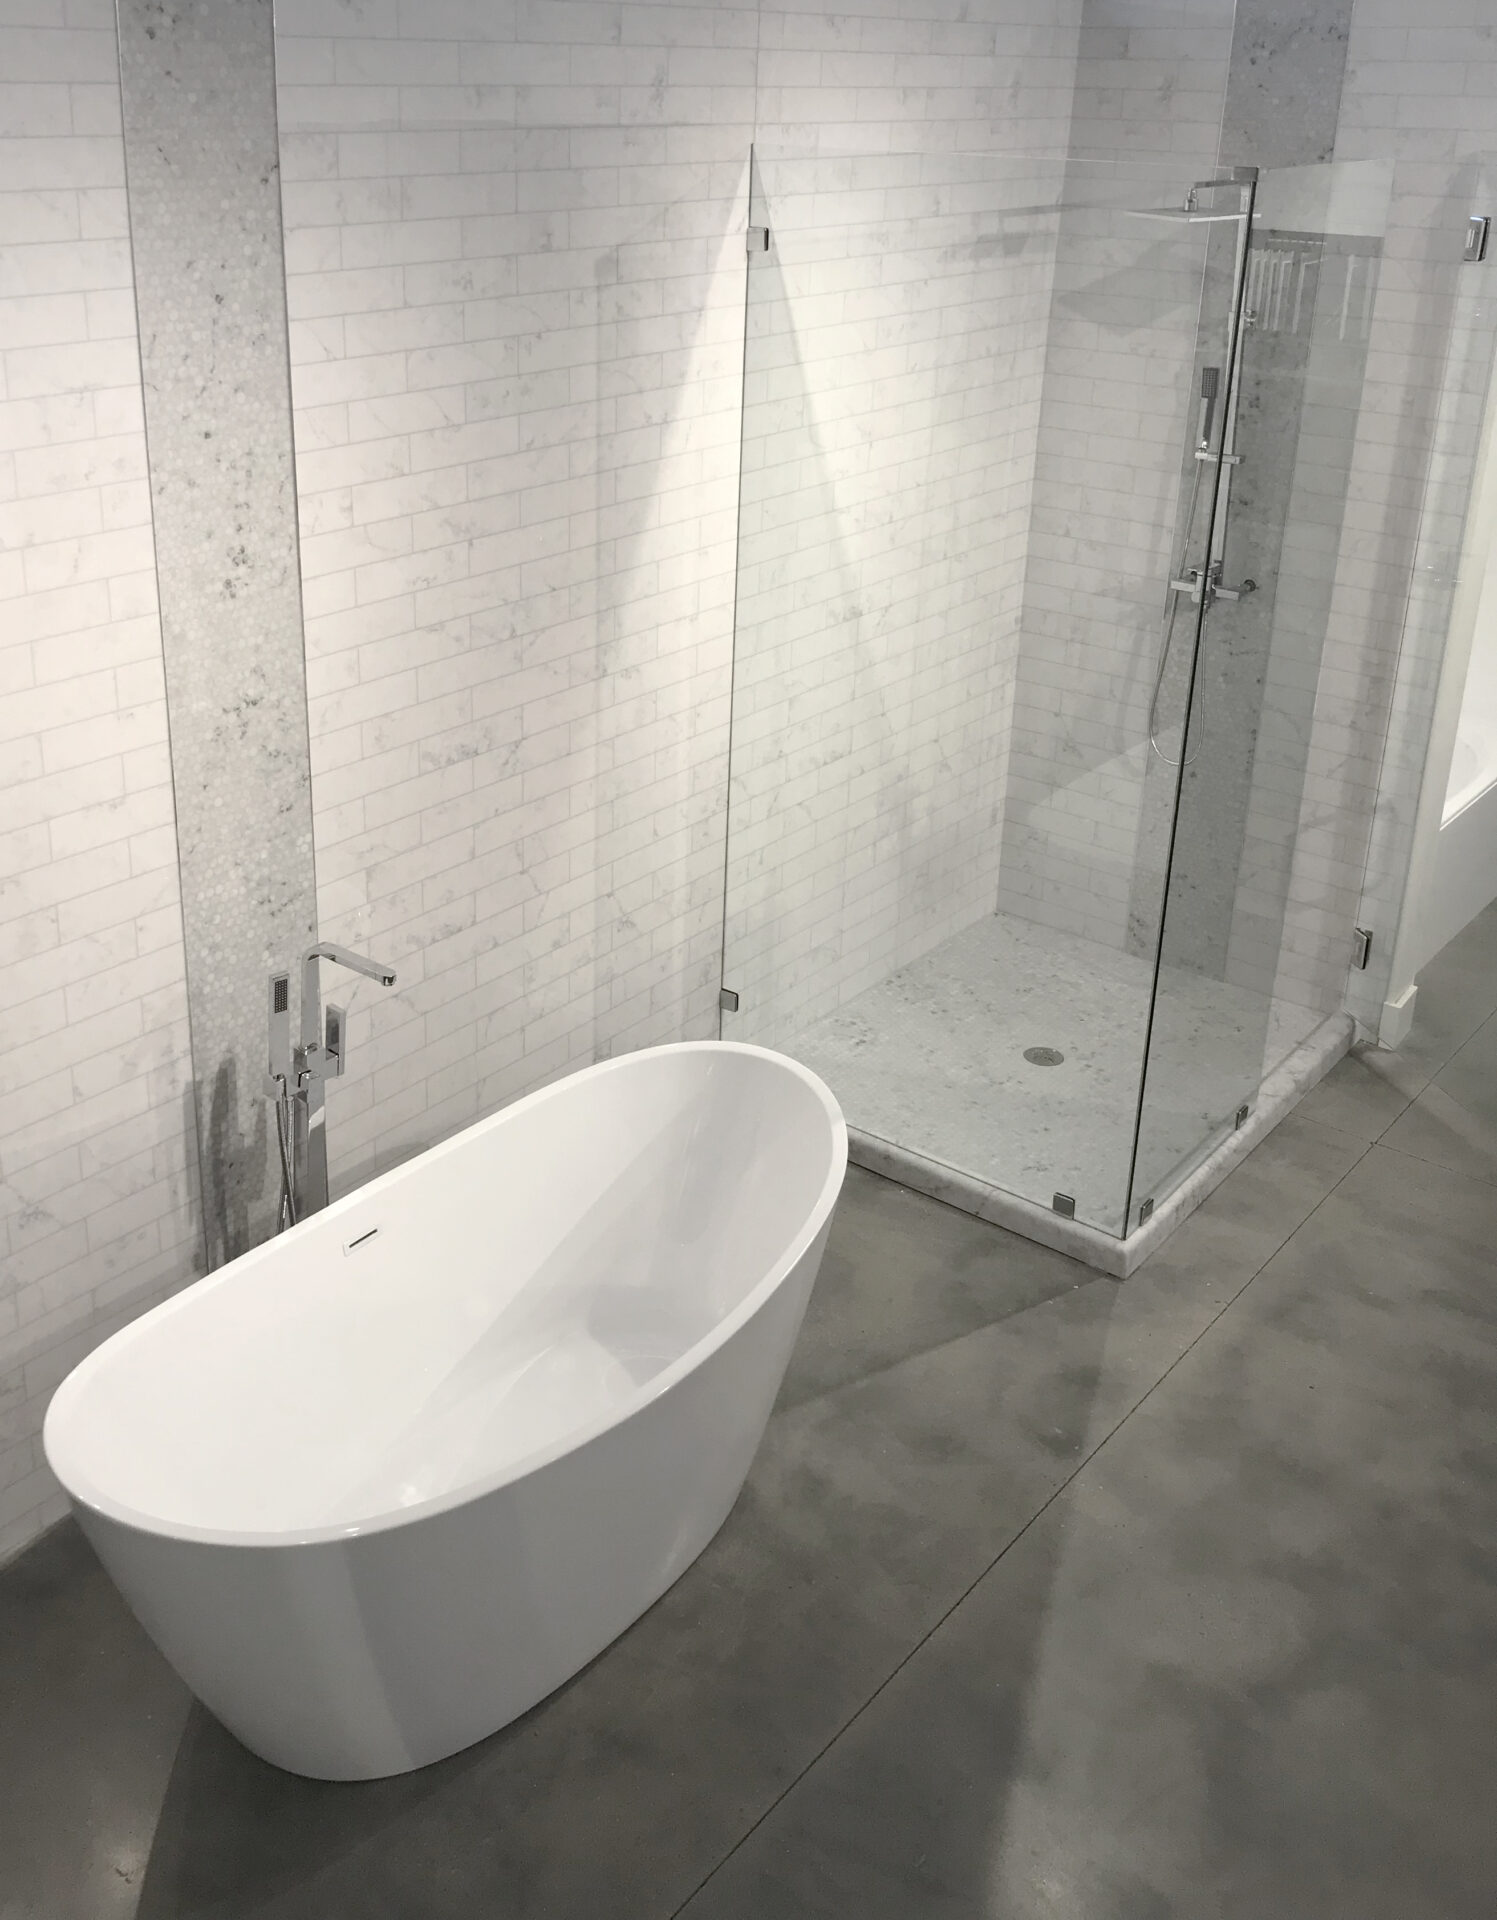 Milano Subway Tile alternative with grout free bathroom and bathtub from AMI in Canton, Ohio.